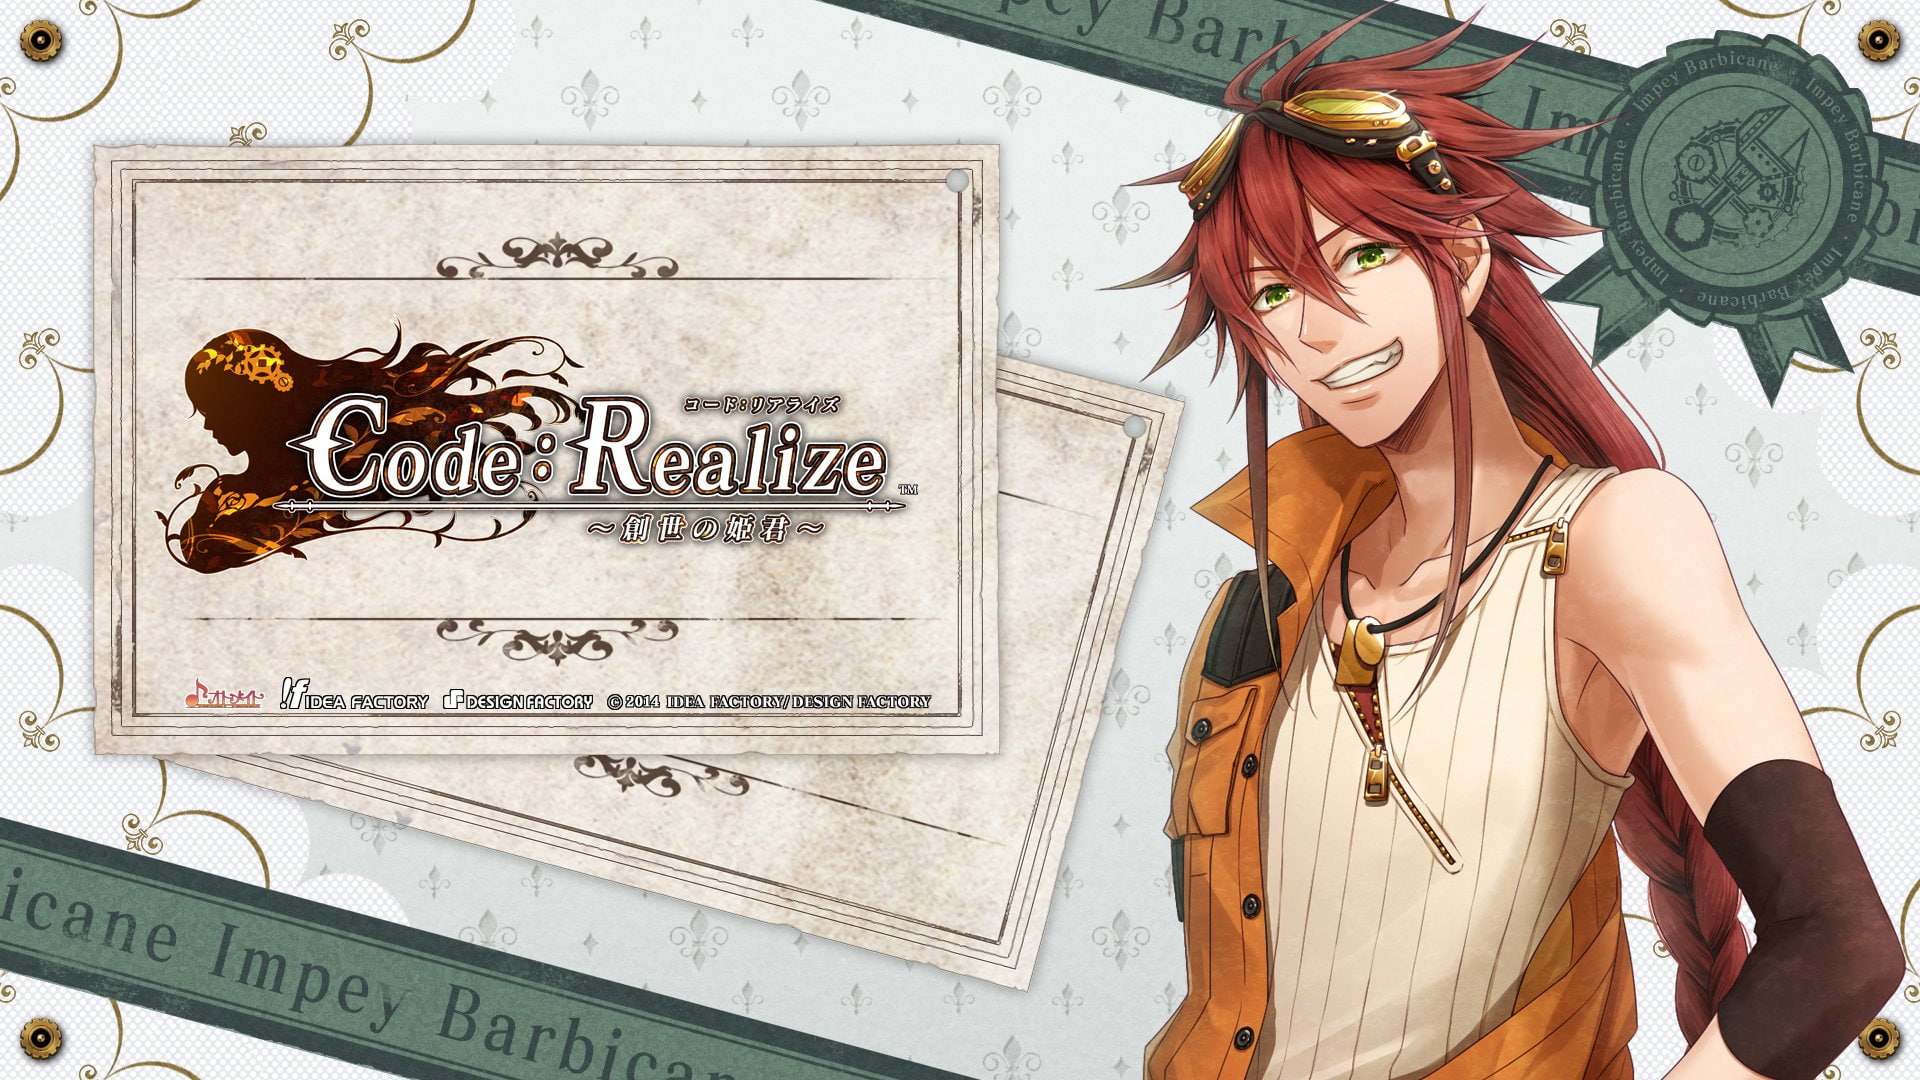 Video Game, Code: Realize, Impey Barbicane